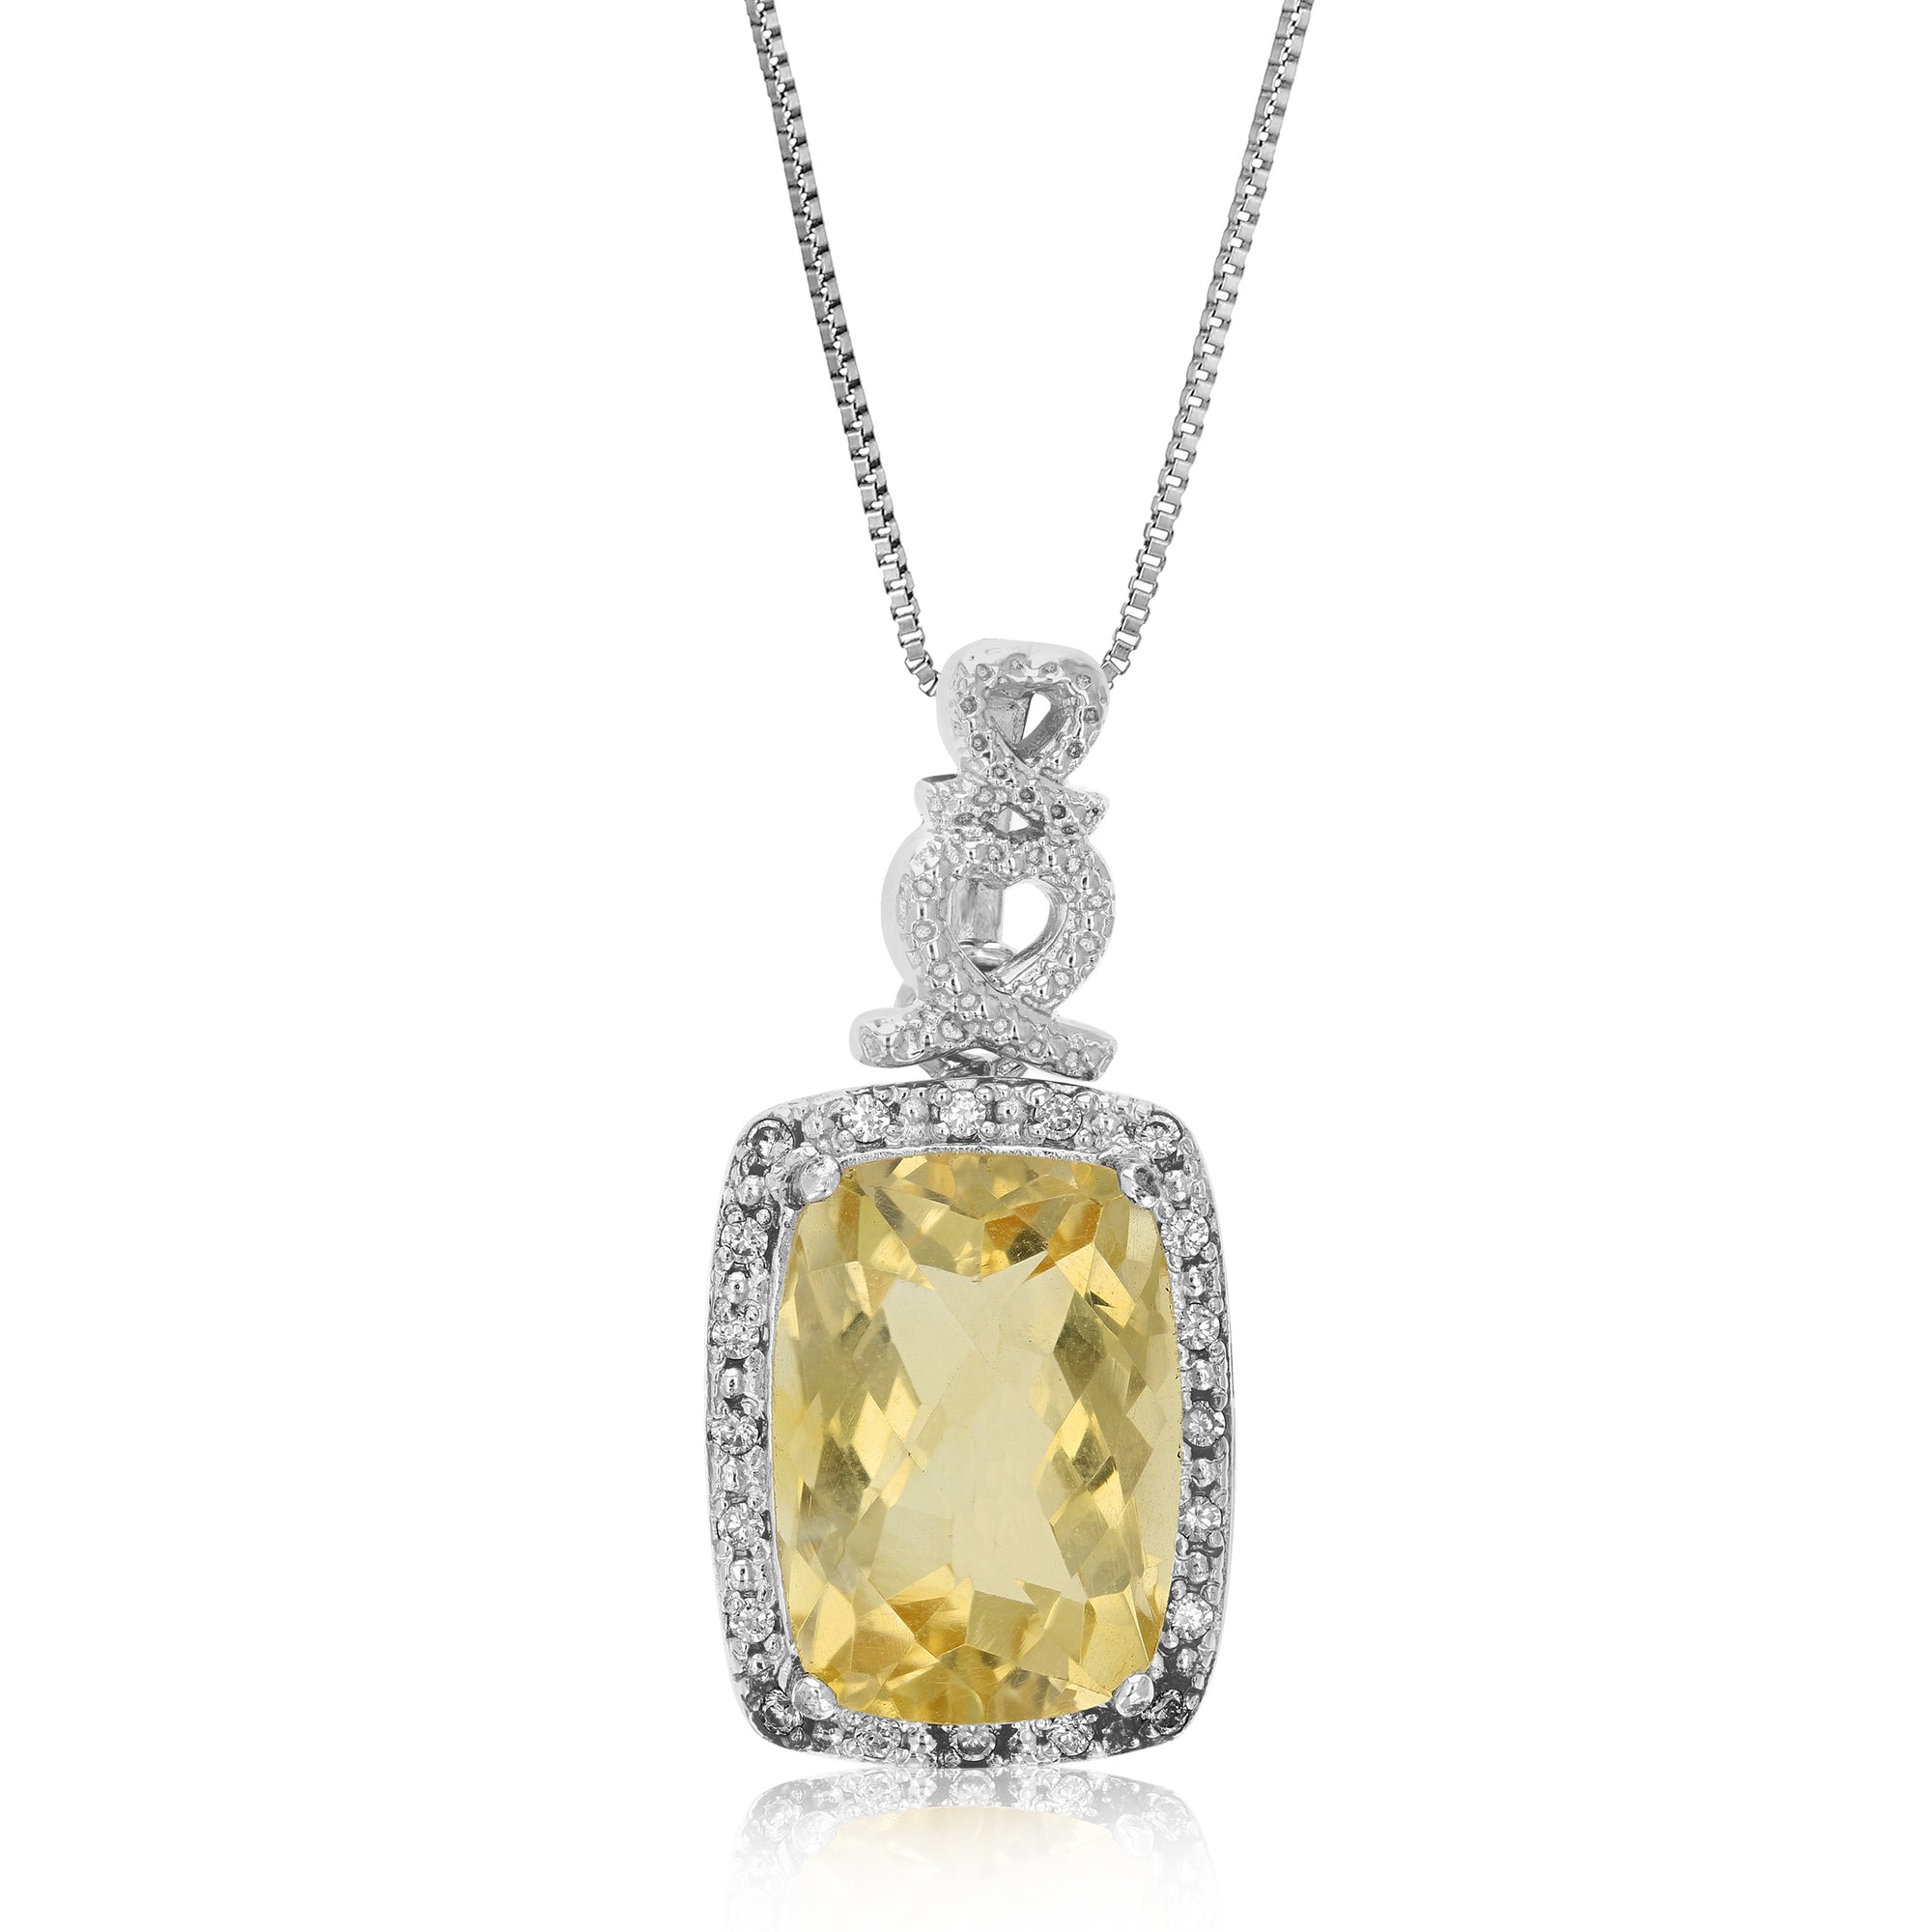 4.70 cttw Pendant Necklace, Citrine Cushion Cut Pendant Necklace for Women in .925 Sterling Silver with Rhodium, 18 Inch Chain, Prong Setting